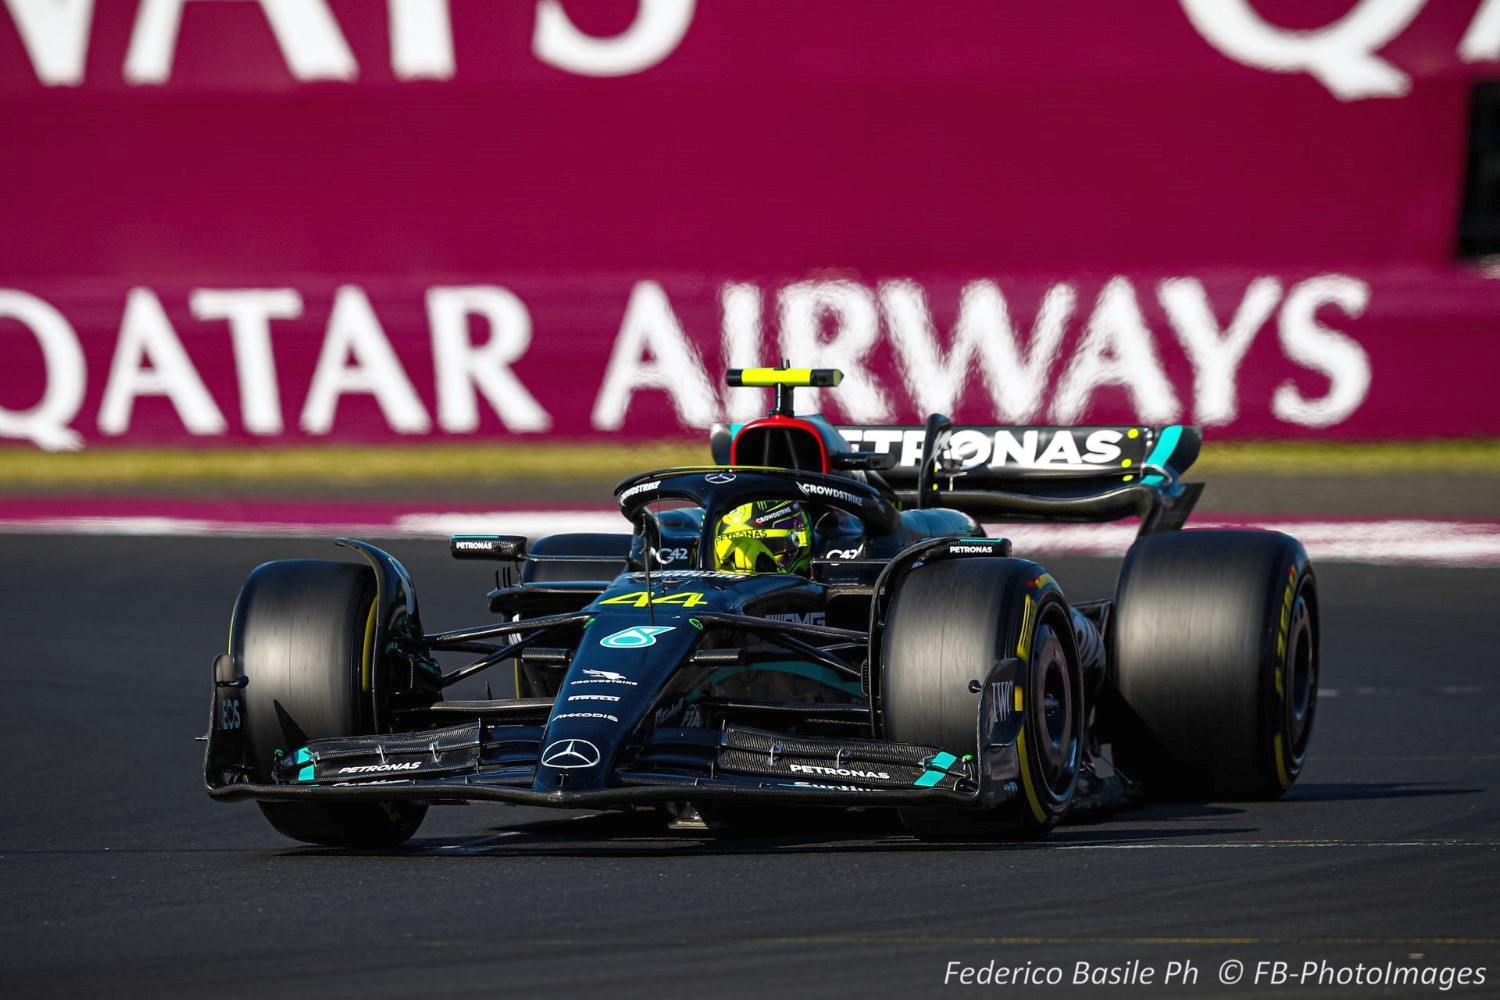 #44 Lewis Hamilton, (GRB) AMG Mercedes Ineos during the Hungarian GP, Budapest 20-23 July 2023 at the Hungaroring, Formula 1 World championship 2023.